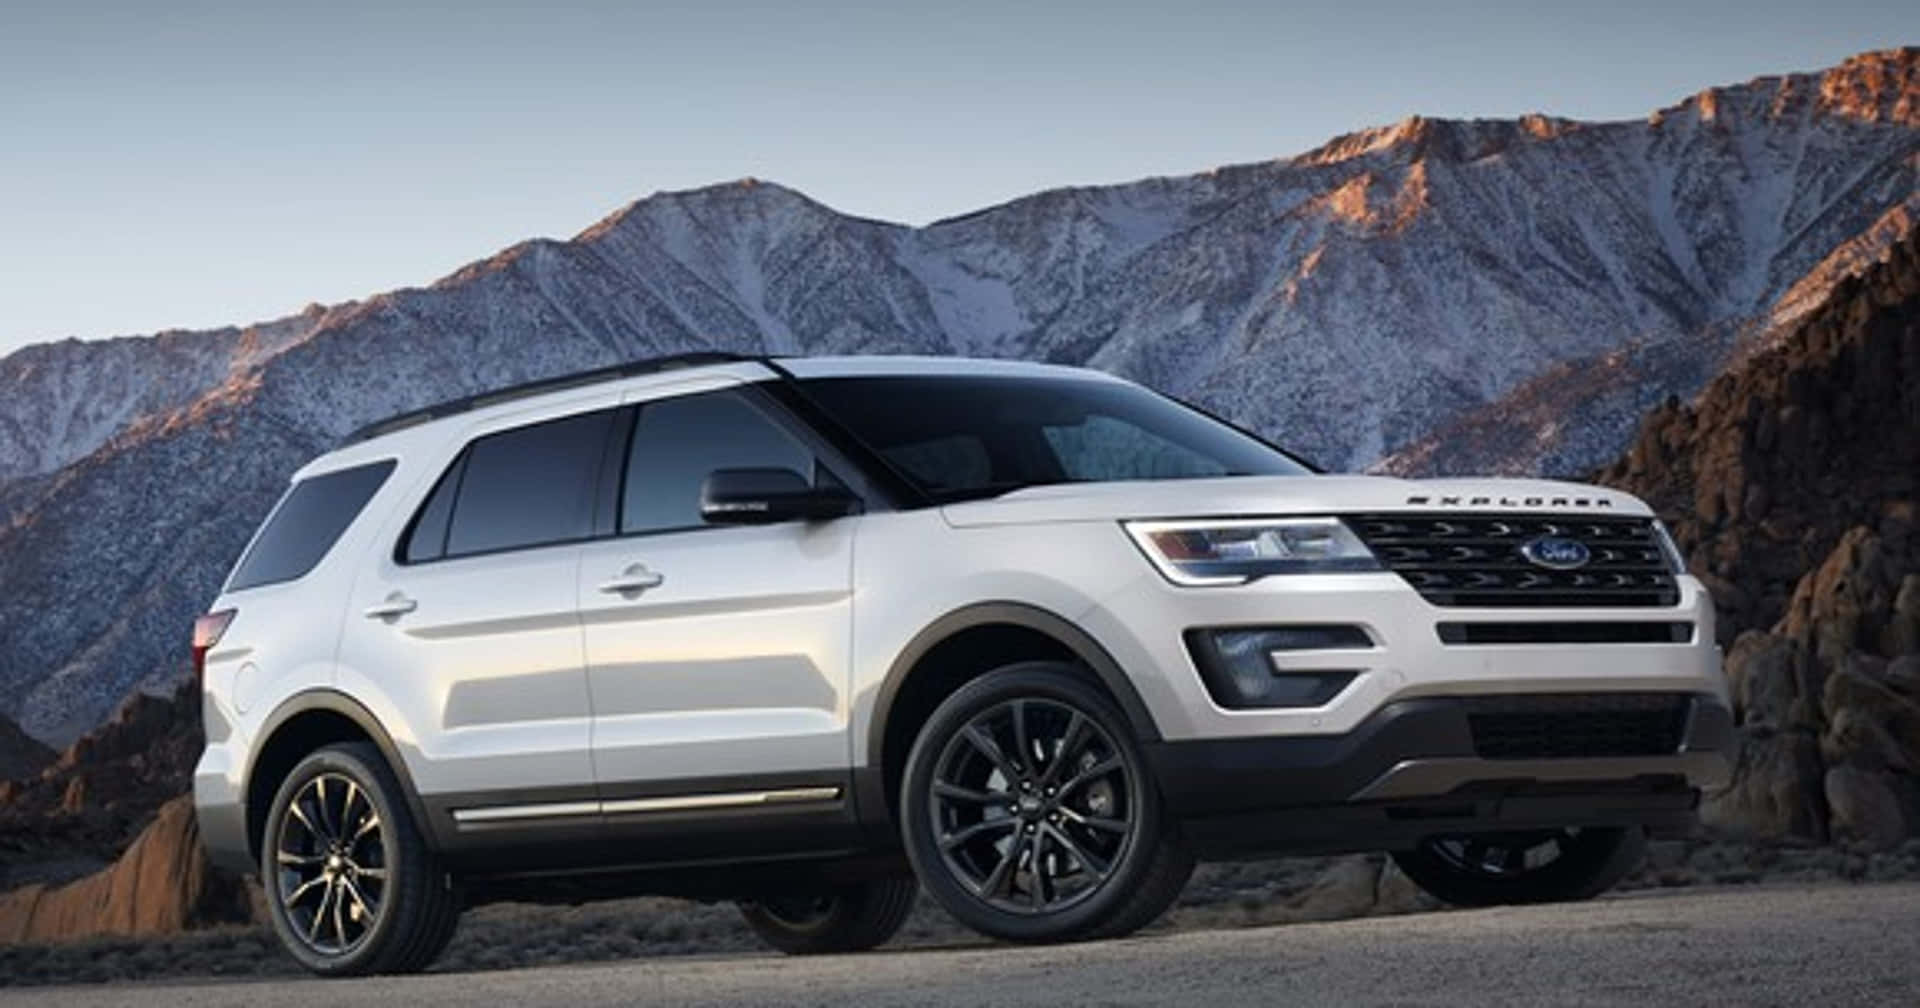 The Sleek and Stylish Ford Explorer on an Adventure Wallpaper